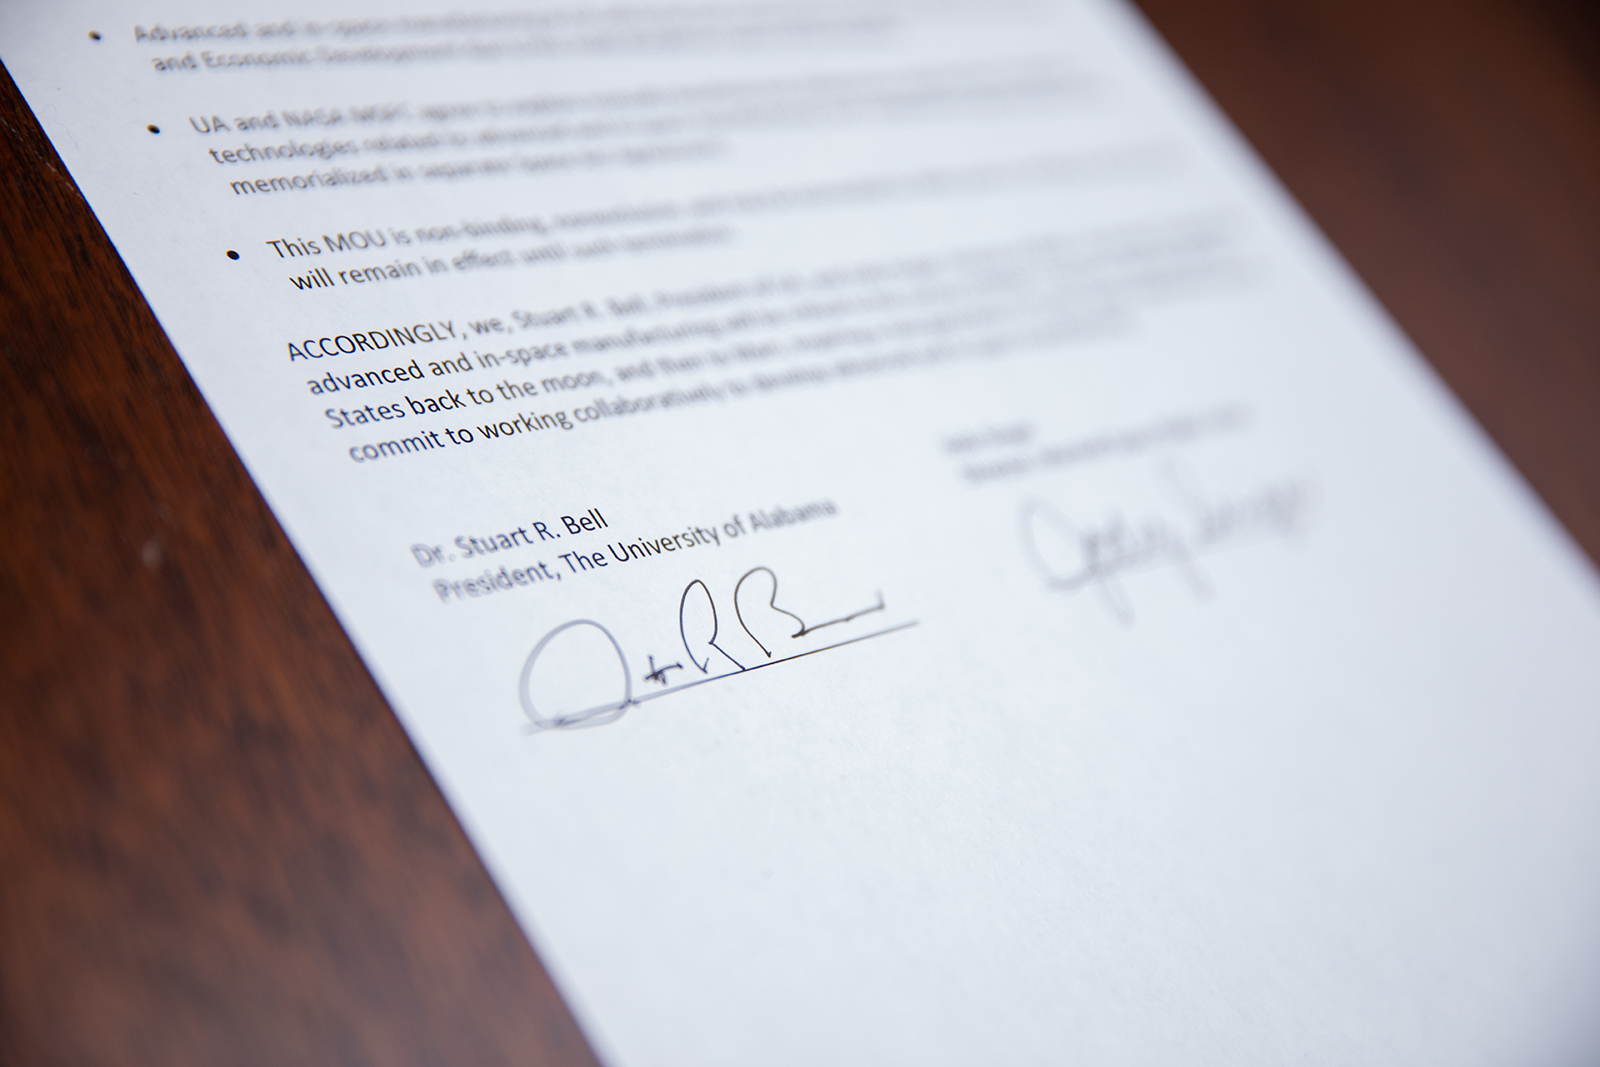 A signed agreement on paper between NASA and The University of Alabama rests on a conference table.